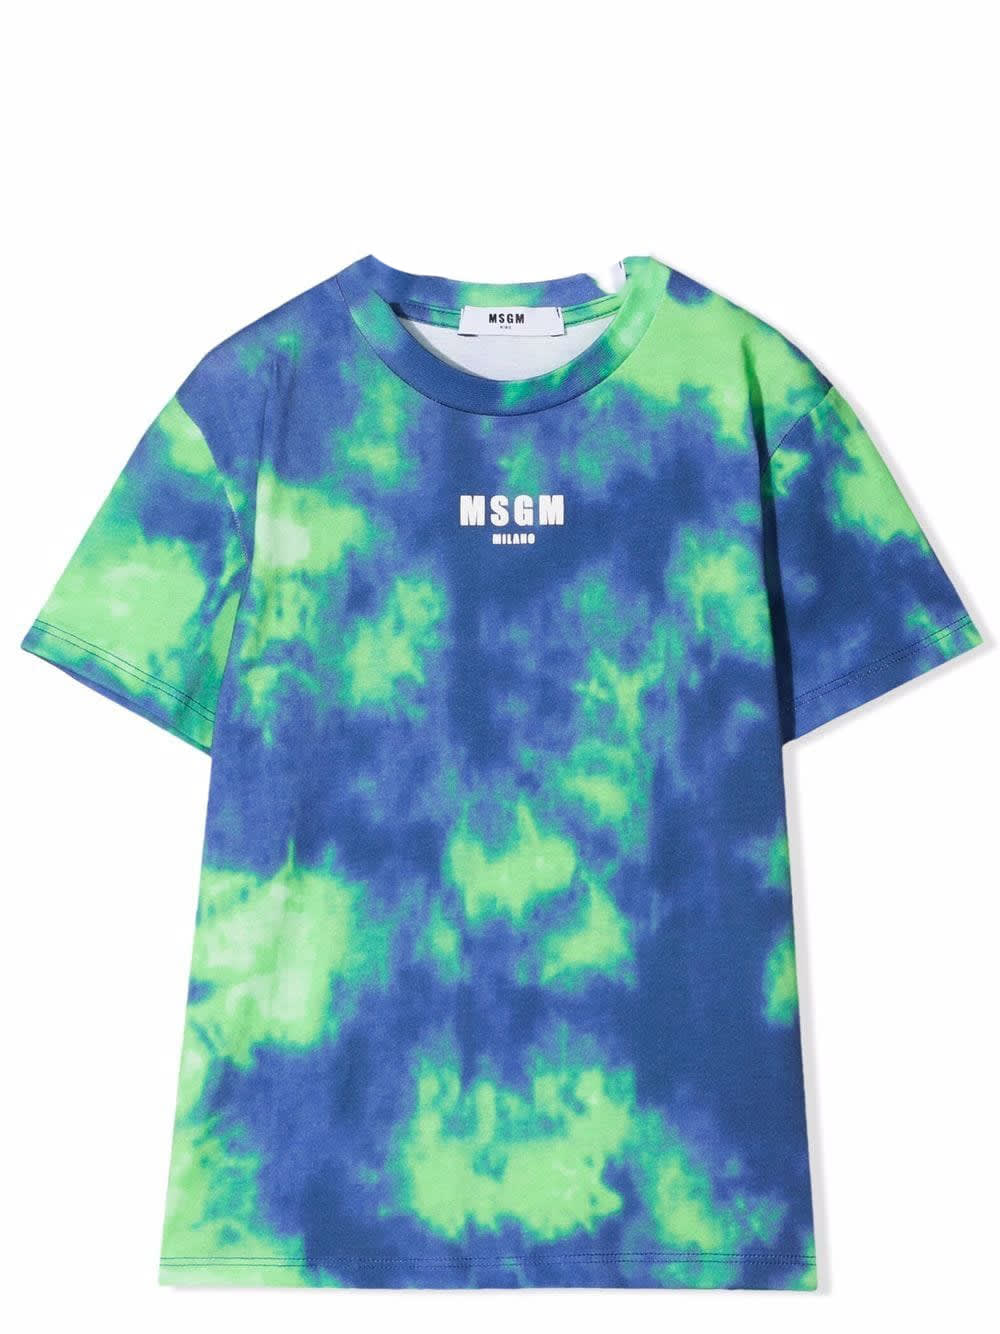 MSGM T-shirt With Tie Dye Pattern